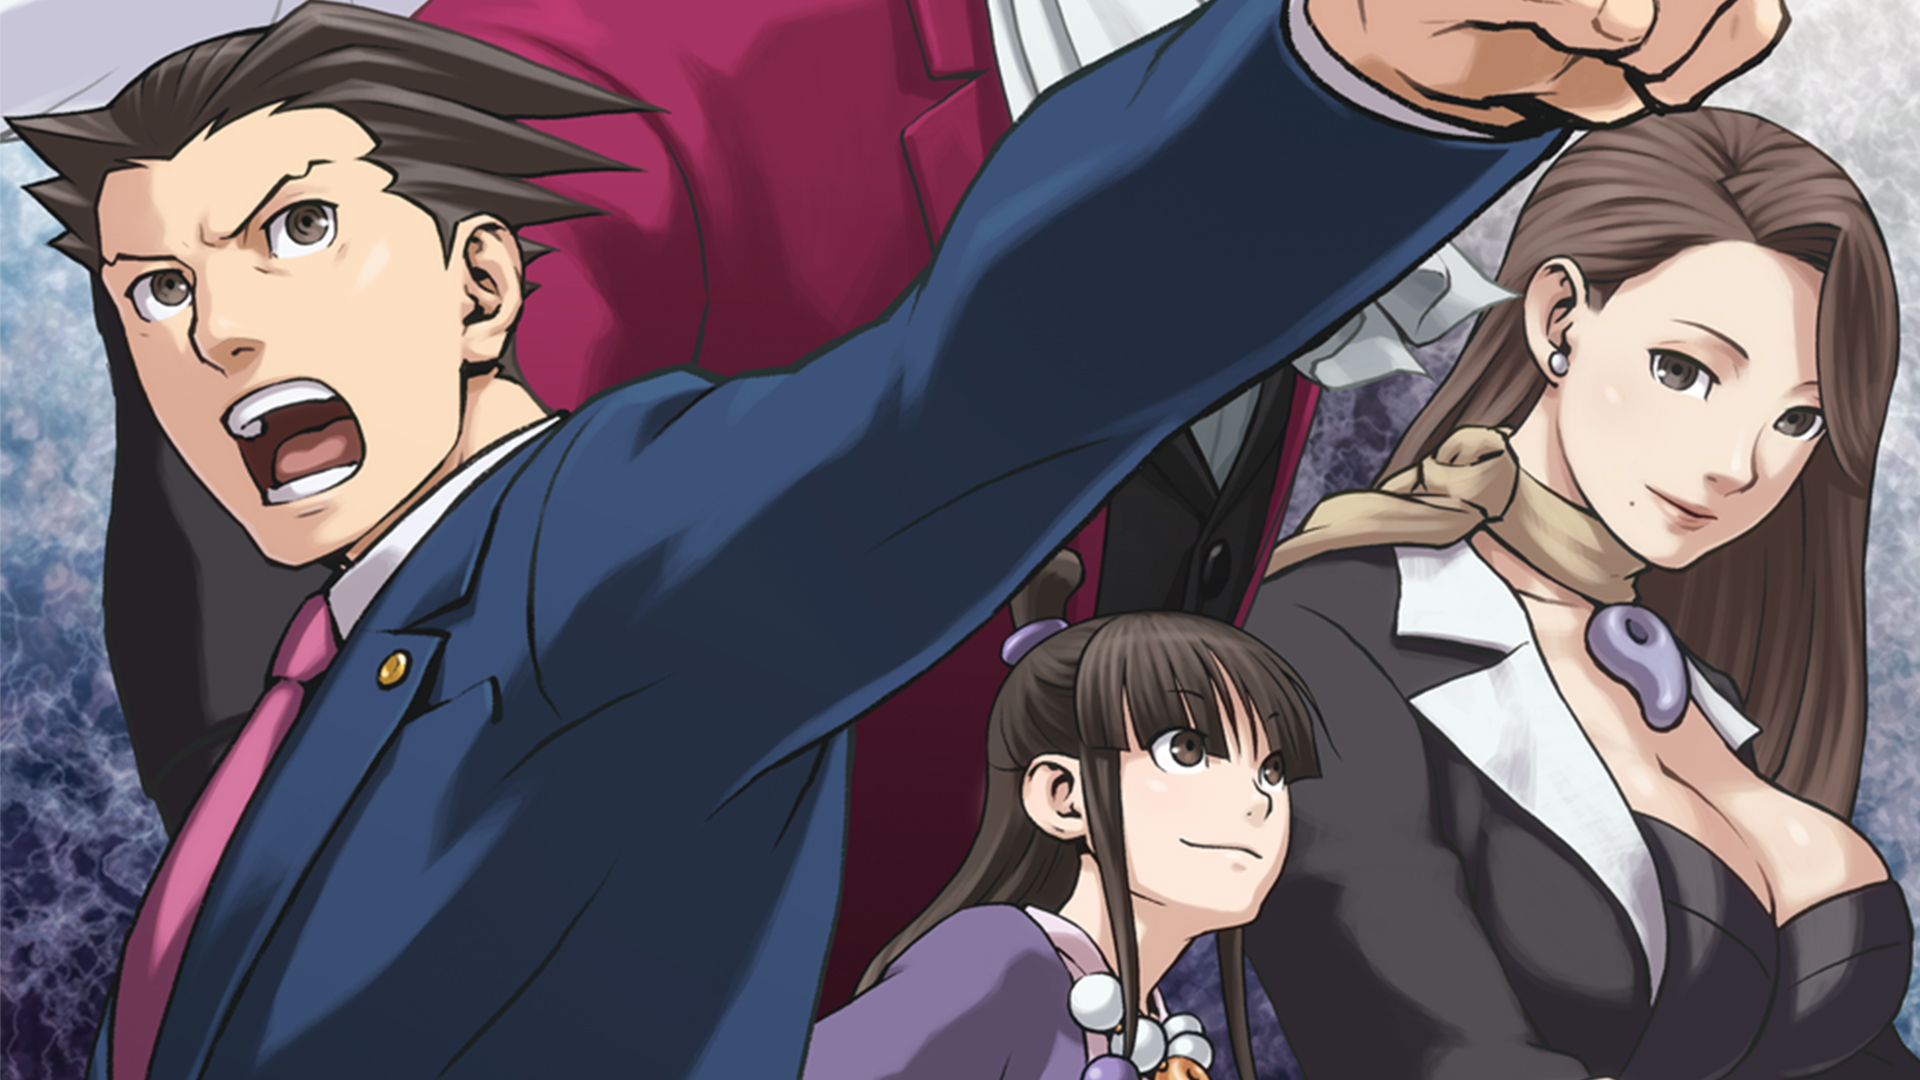 1920x1080 Free download No objections Phoenix Wright Ace Attorney Trilogy hits PC in [] for your Desktop, Mobile \u0026 Tablet | Explore 36+ Phoenix Wright: Ace Attorney Trilogy Wallpapers | Phoenix Wright: Ace